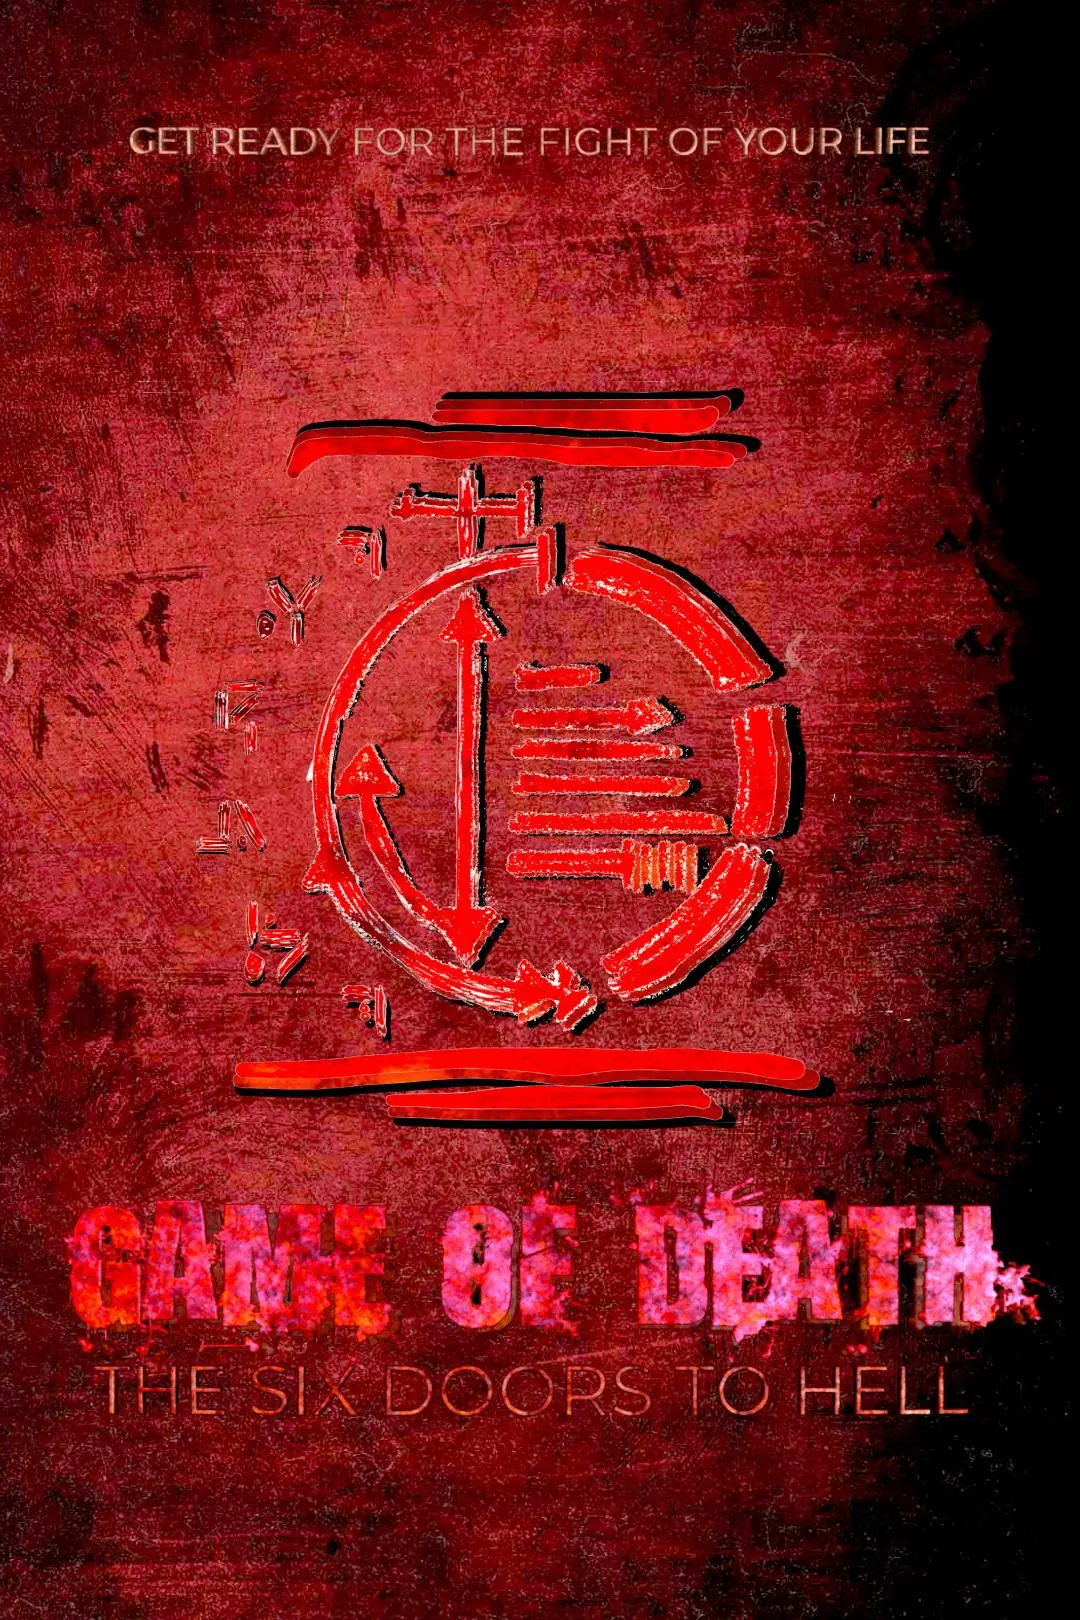 Game of Death - The six Doors to Hell_peliplat